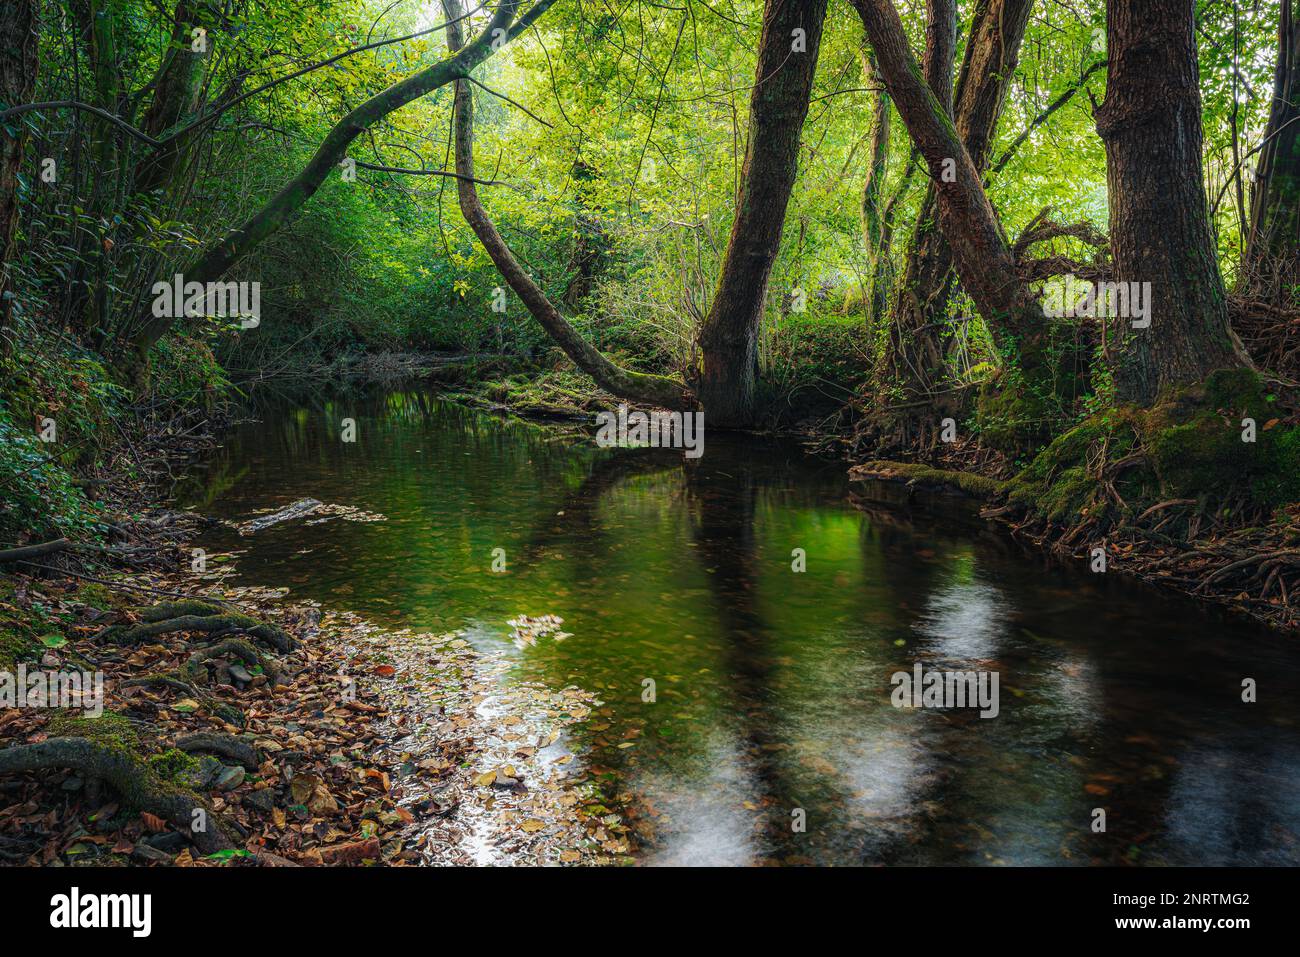 River in forest, idyllic view of a water stream in a virgin environment Stock Photo